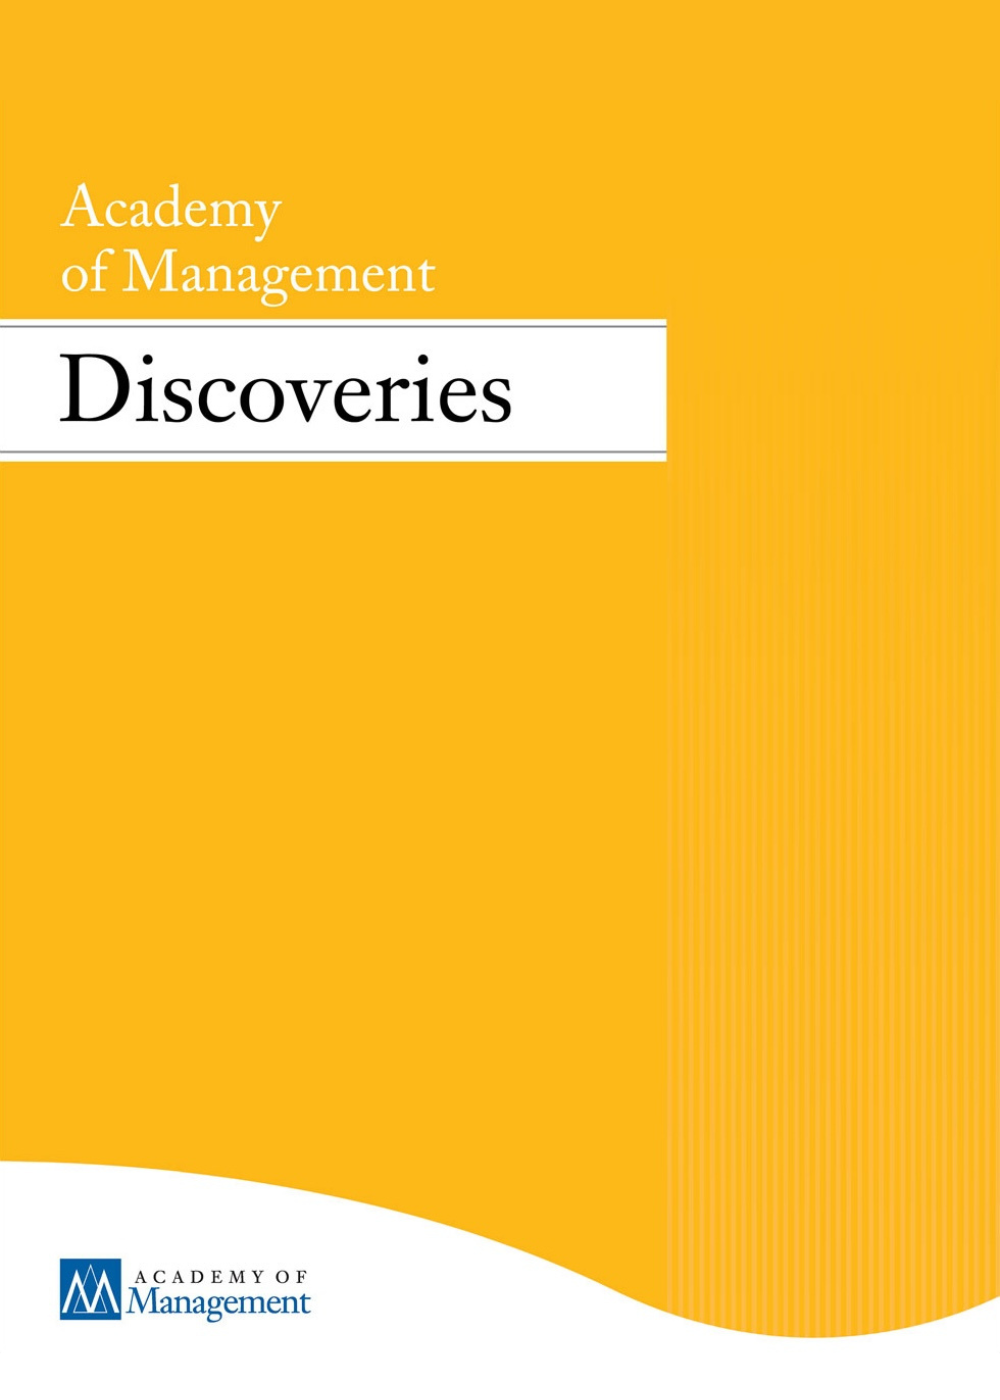 Academy of Management Discoveries